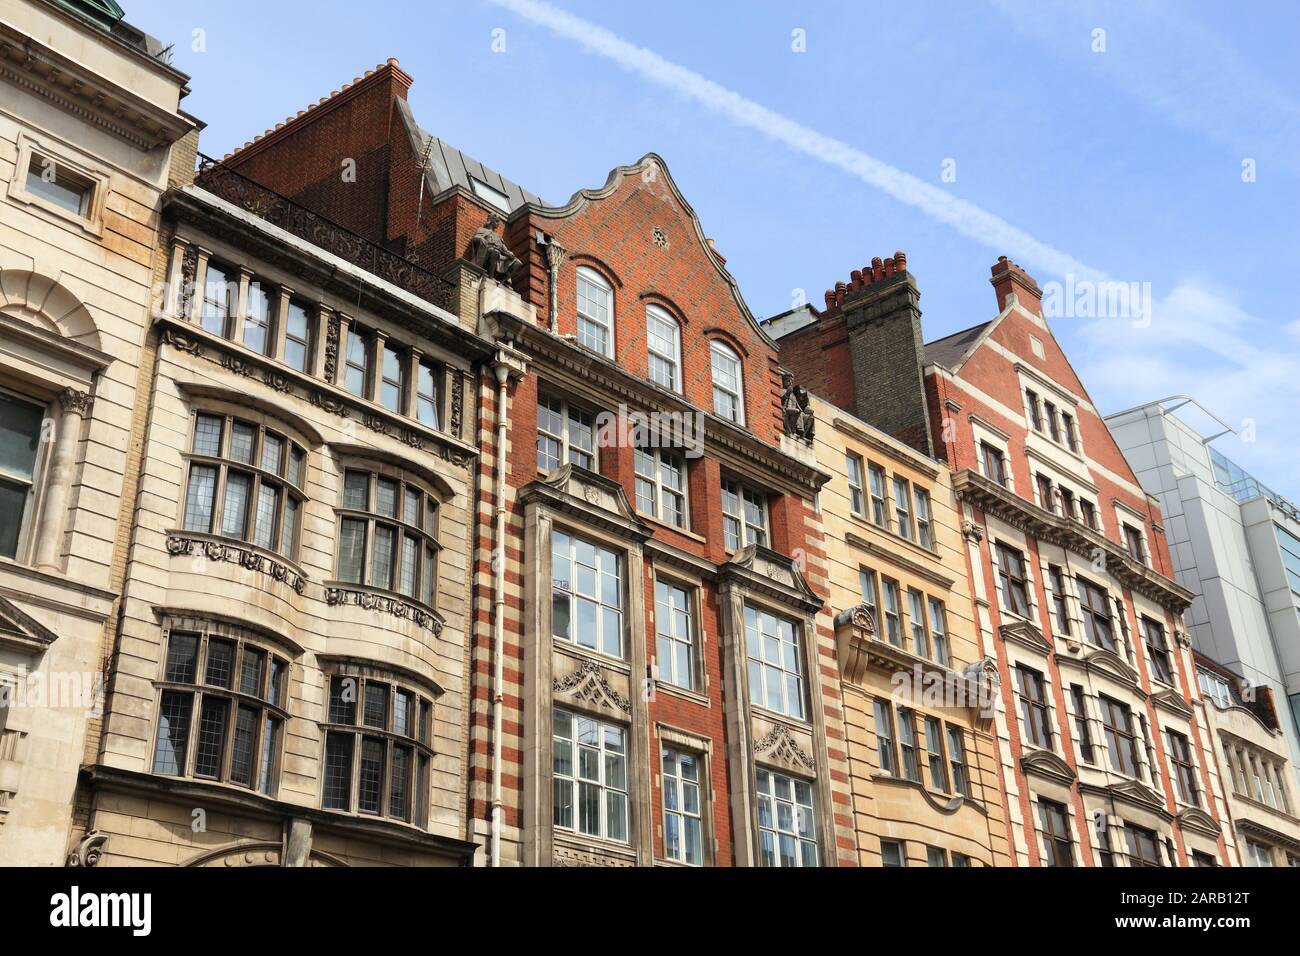 London, UK - old architecture Kingsway street in Holborn district. Stock Photo